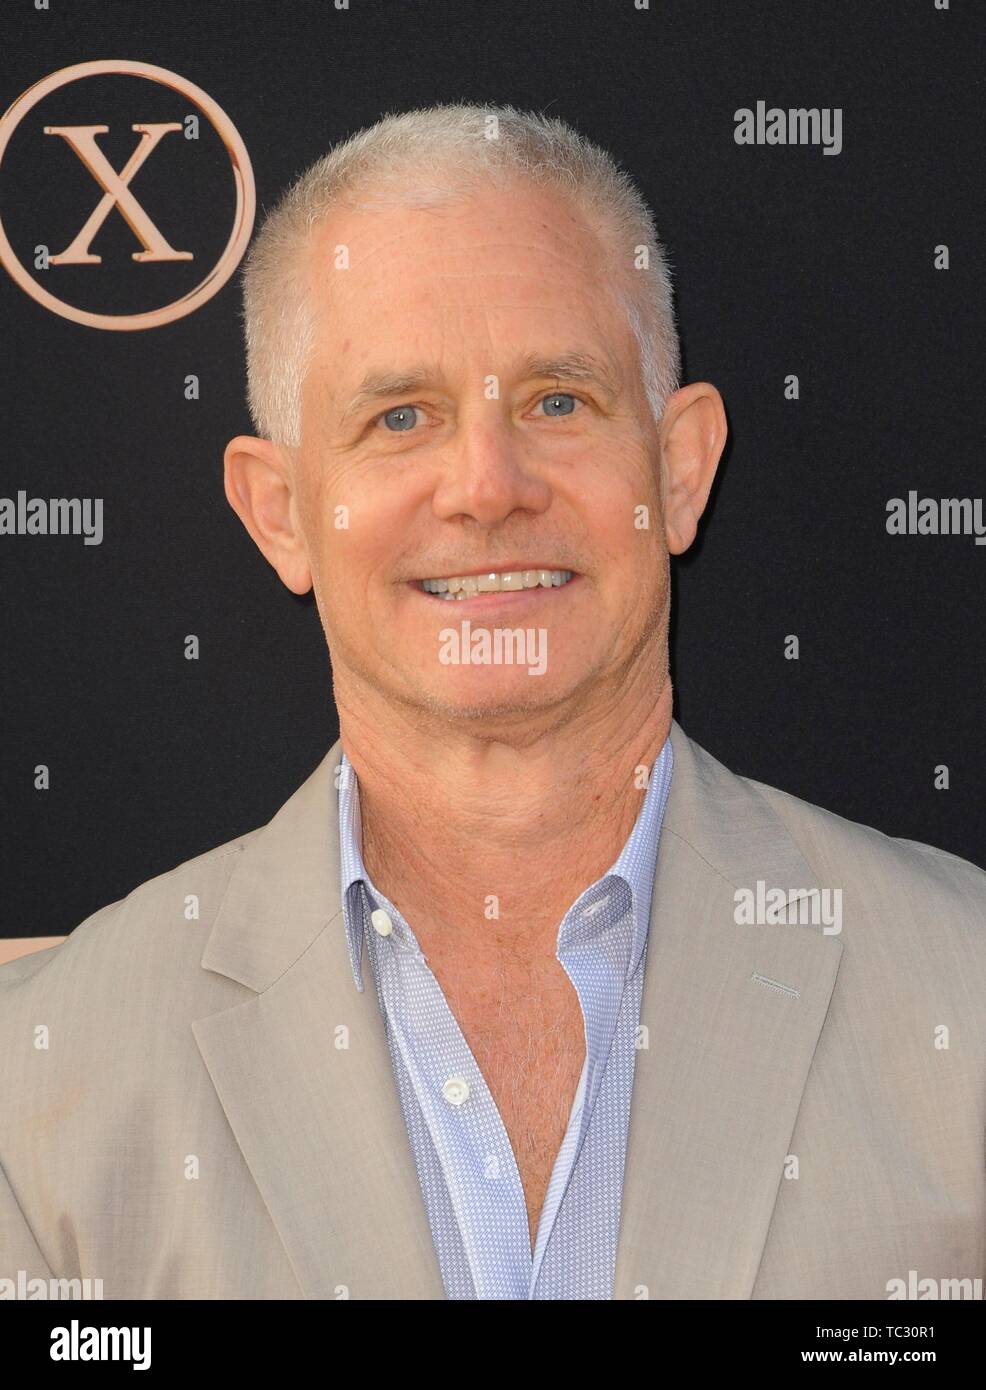 Los Angeles, CA, USA. 4th June, 2019. Hutch Parker at arrivals for X-MEN: DARK PHOENIX Premiere, TCL Chinese Theatre (formerly Grauman's), Los Angeles, CA June 4, 2019. Credit: Elizabeth Goodenough/Everett Collection/Alamy Live News Stock Photo